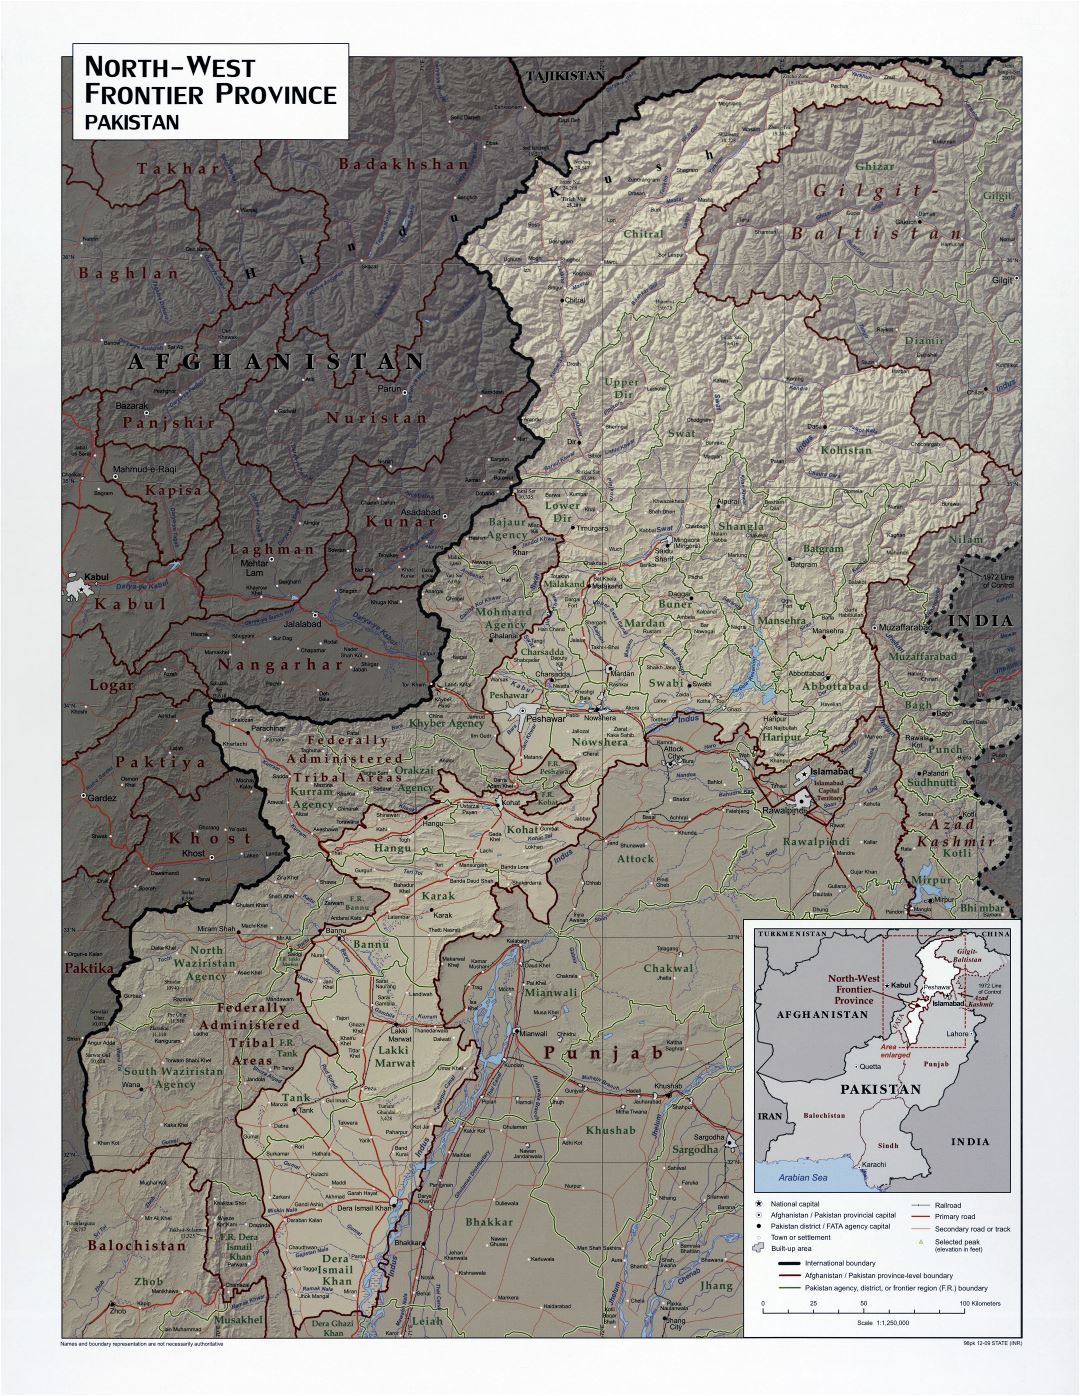 Large scale detailed North West Frontier Province of Pakistan map with relief, roads, railroads and cities - 2009